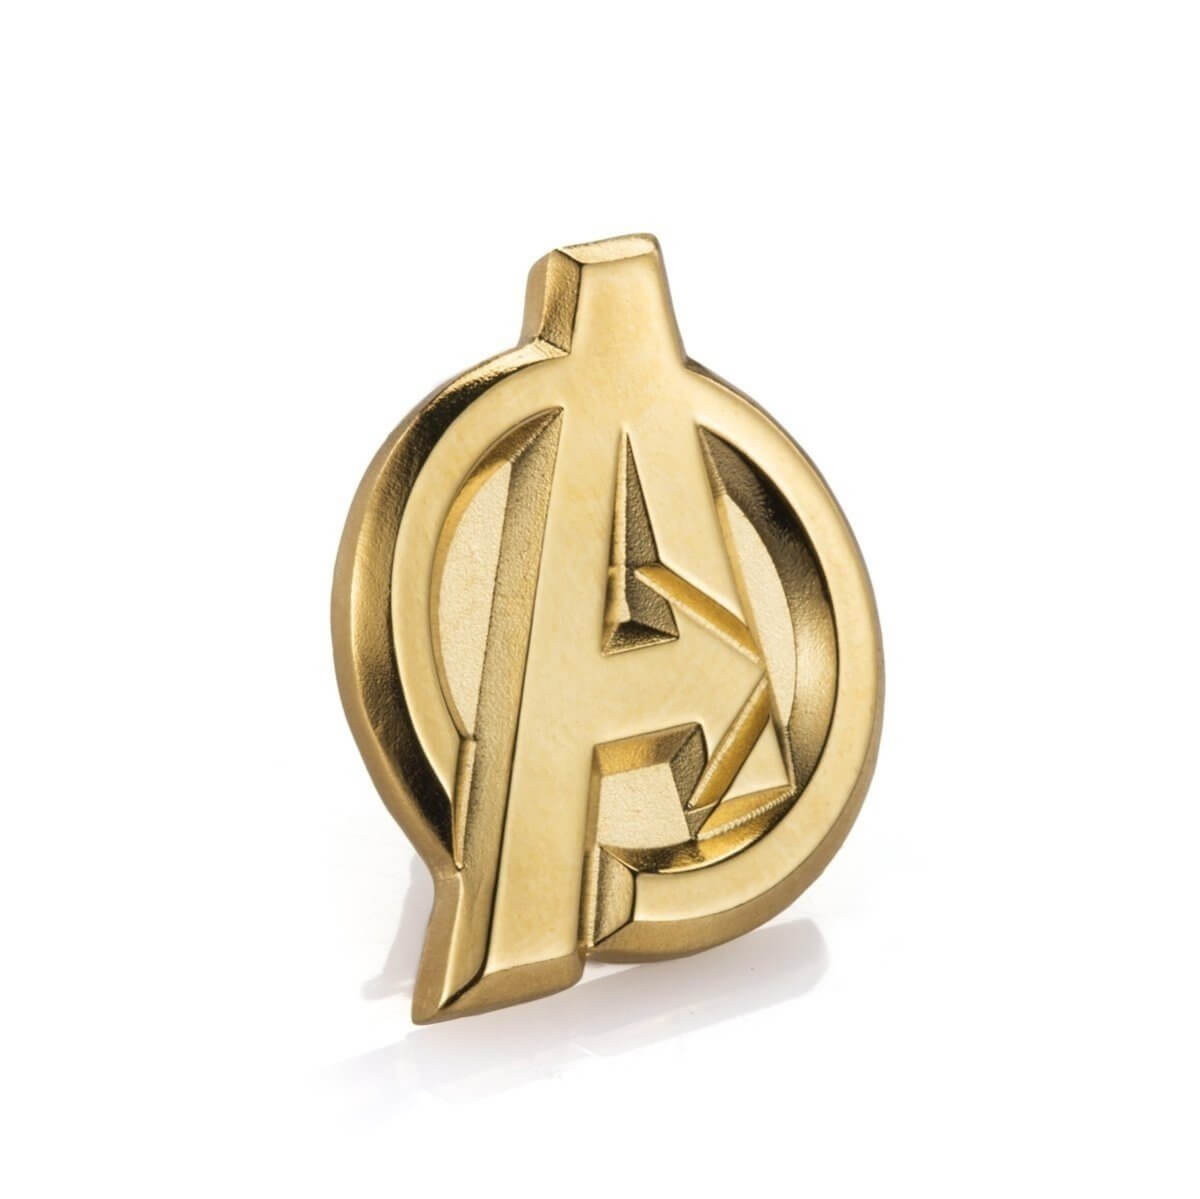 Avengers Gilt Insignia Lapel Pin - Marvel Collectible gift